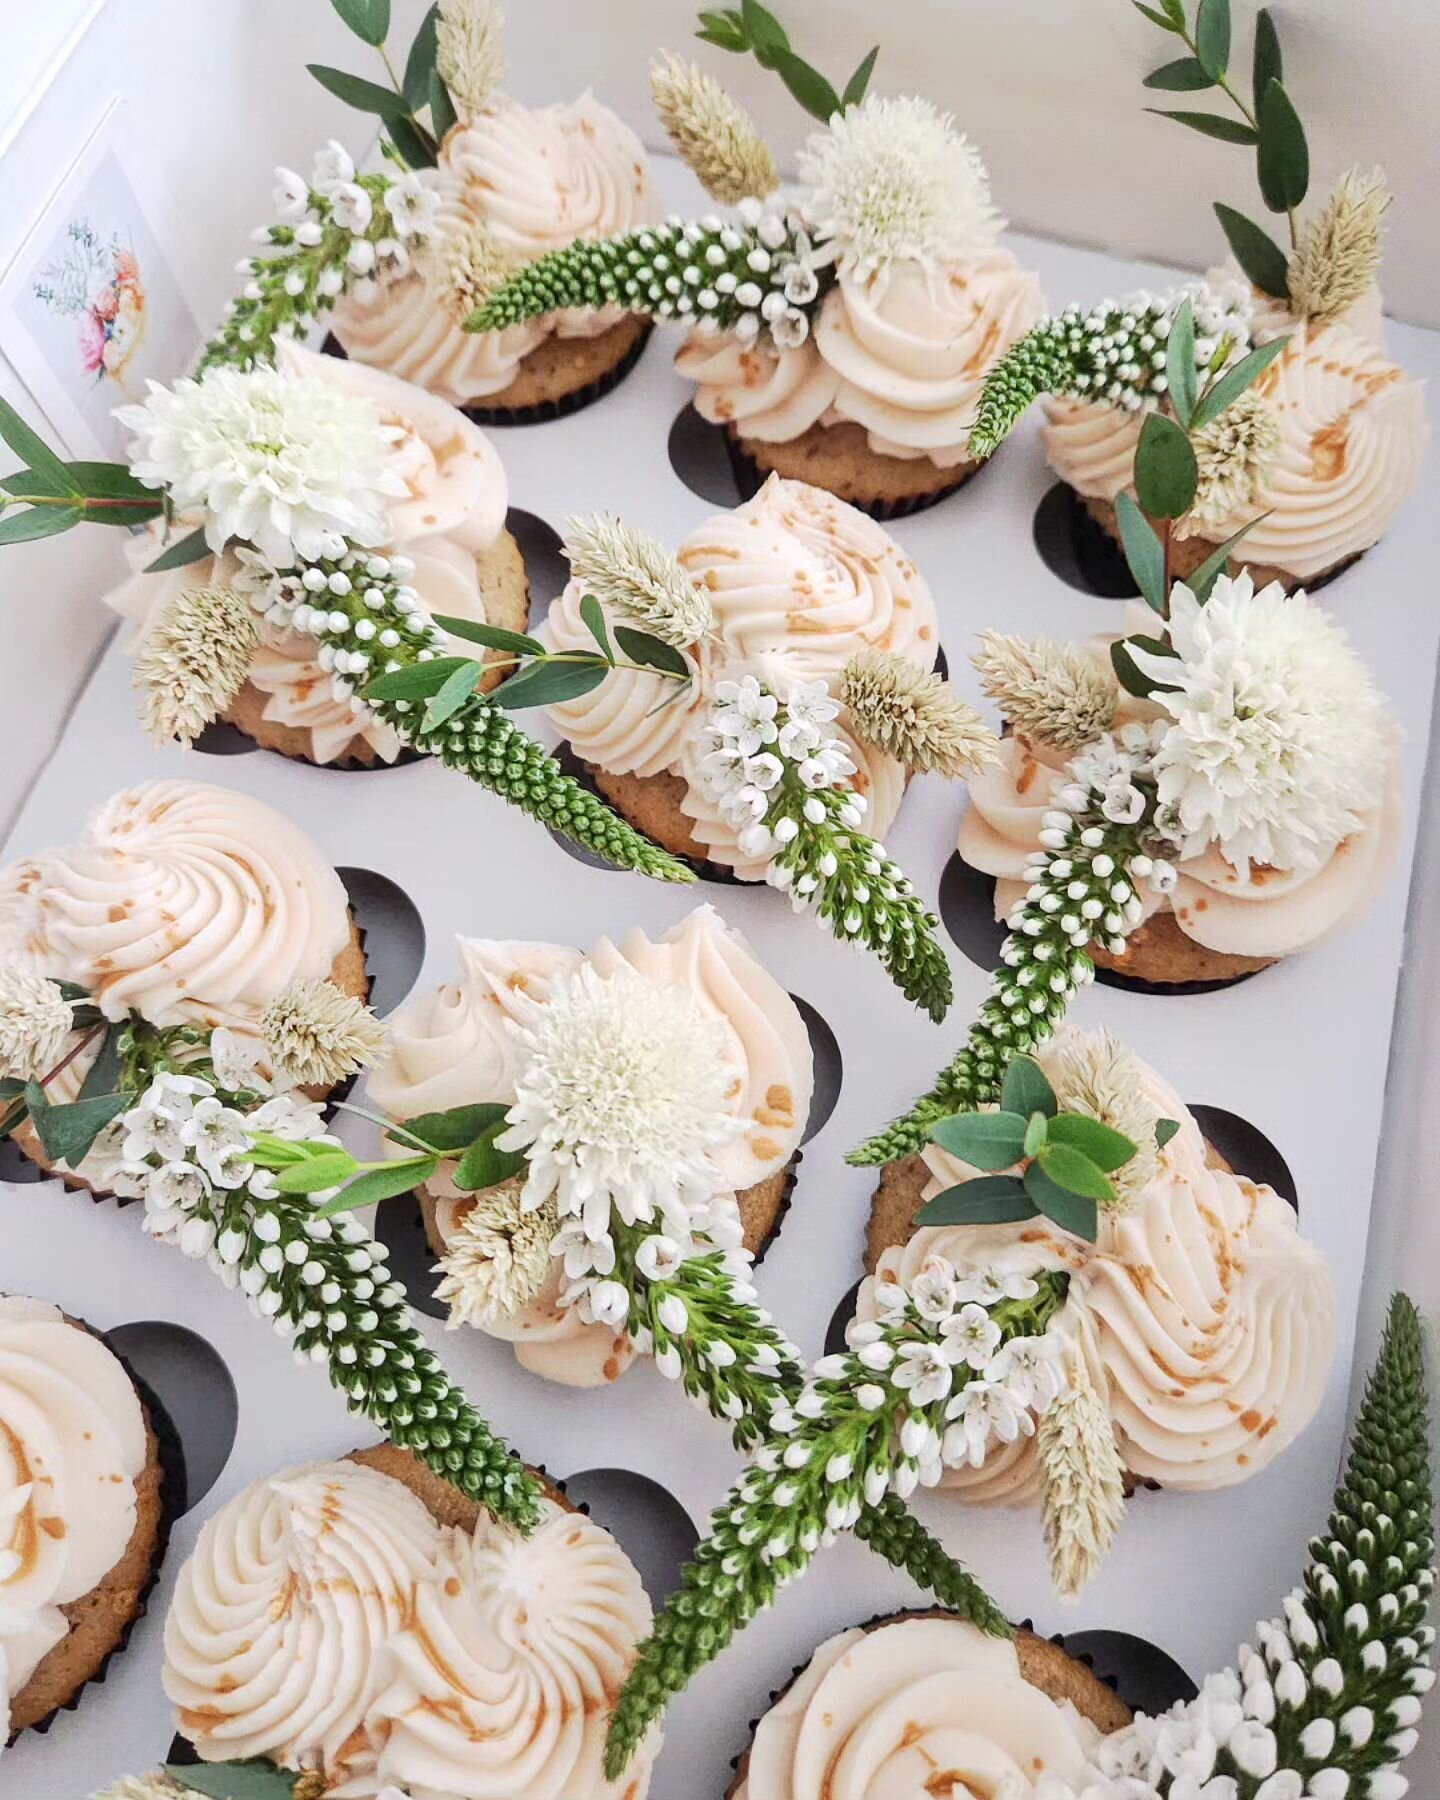 A white and nude color palette for a special baby boy 😍
.
Blooms | @leonoramoss 
.
.
.
.
.
.
.
#finaleefloralcakes #floralcupcakes #babyshowerdecor #babyshowers #babyboy #floralarrangements #freshflowercupcakes #cupcakeideas #cupcakesofinstagram #cu